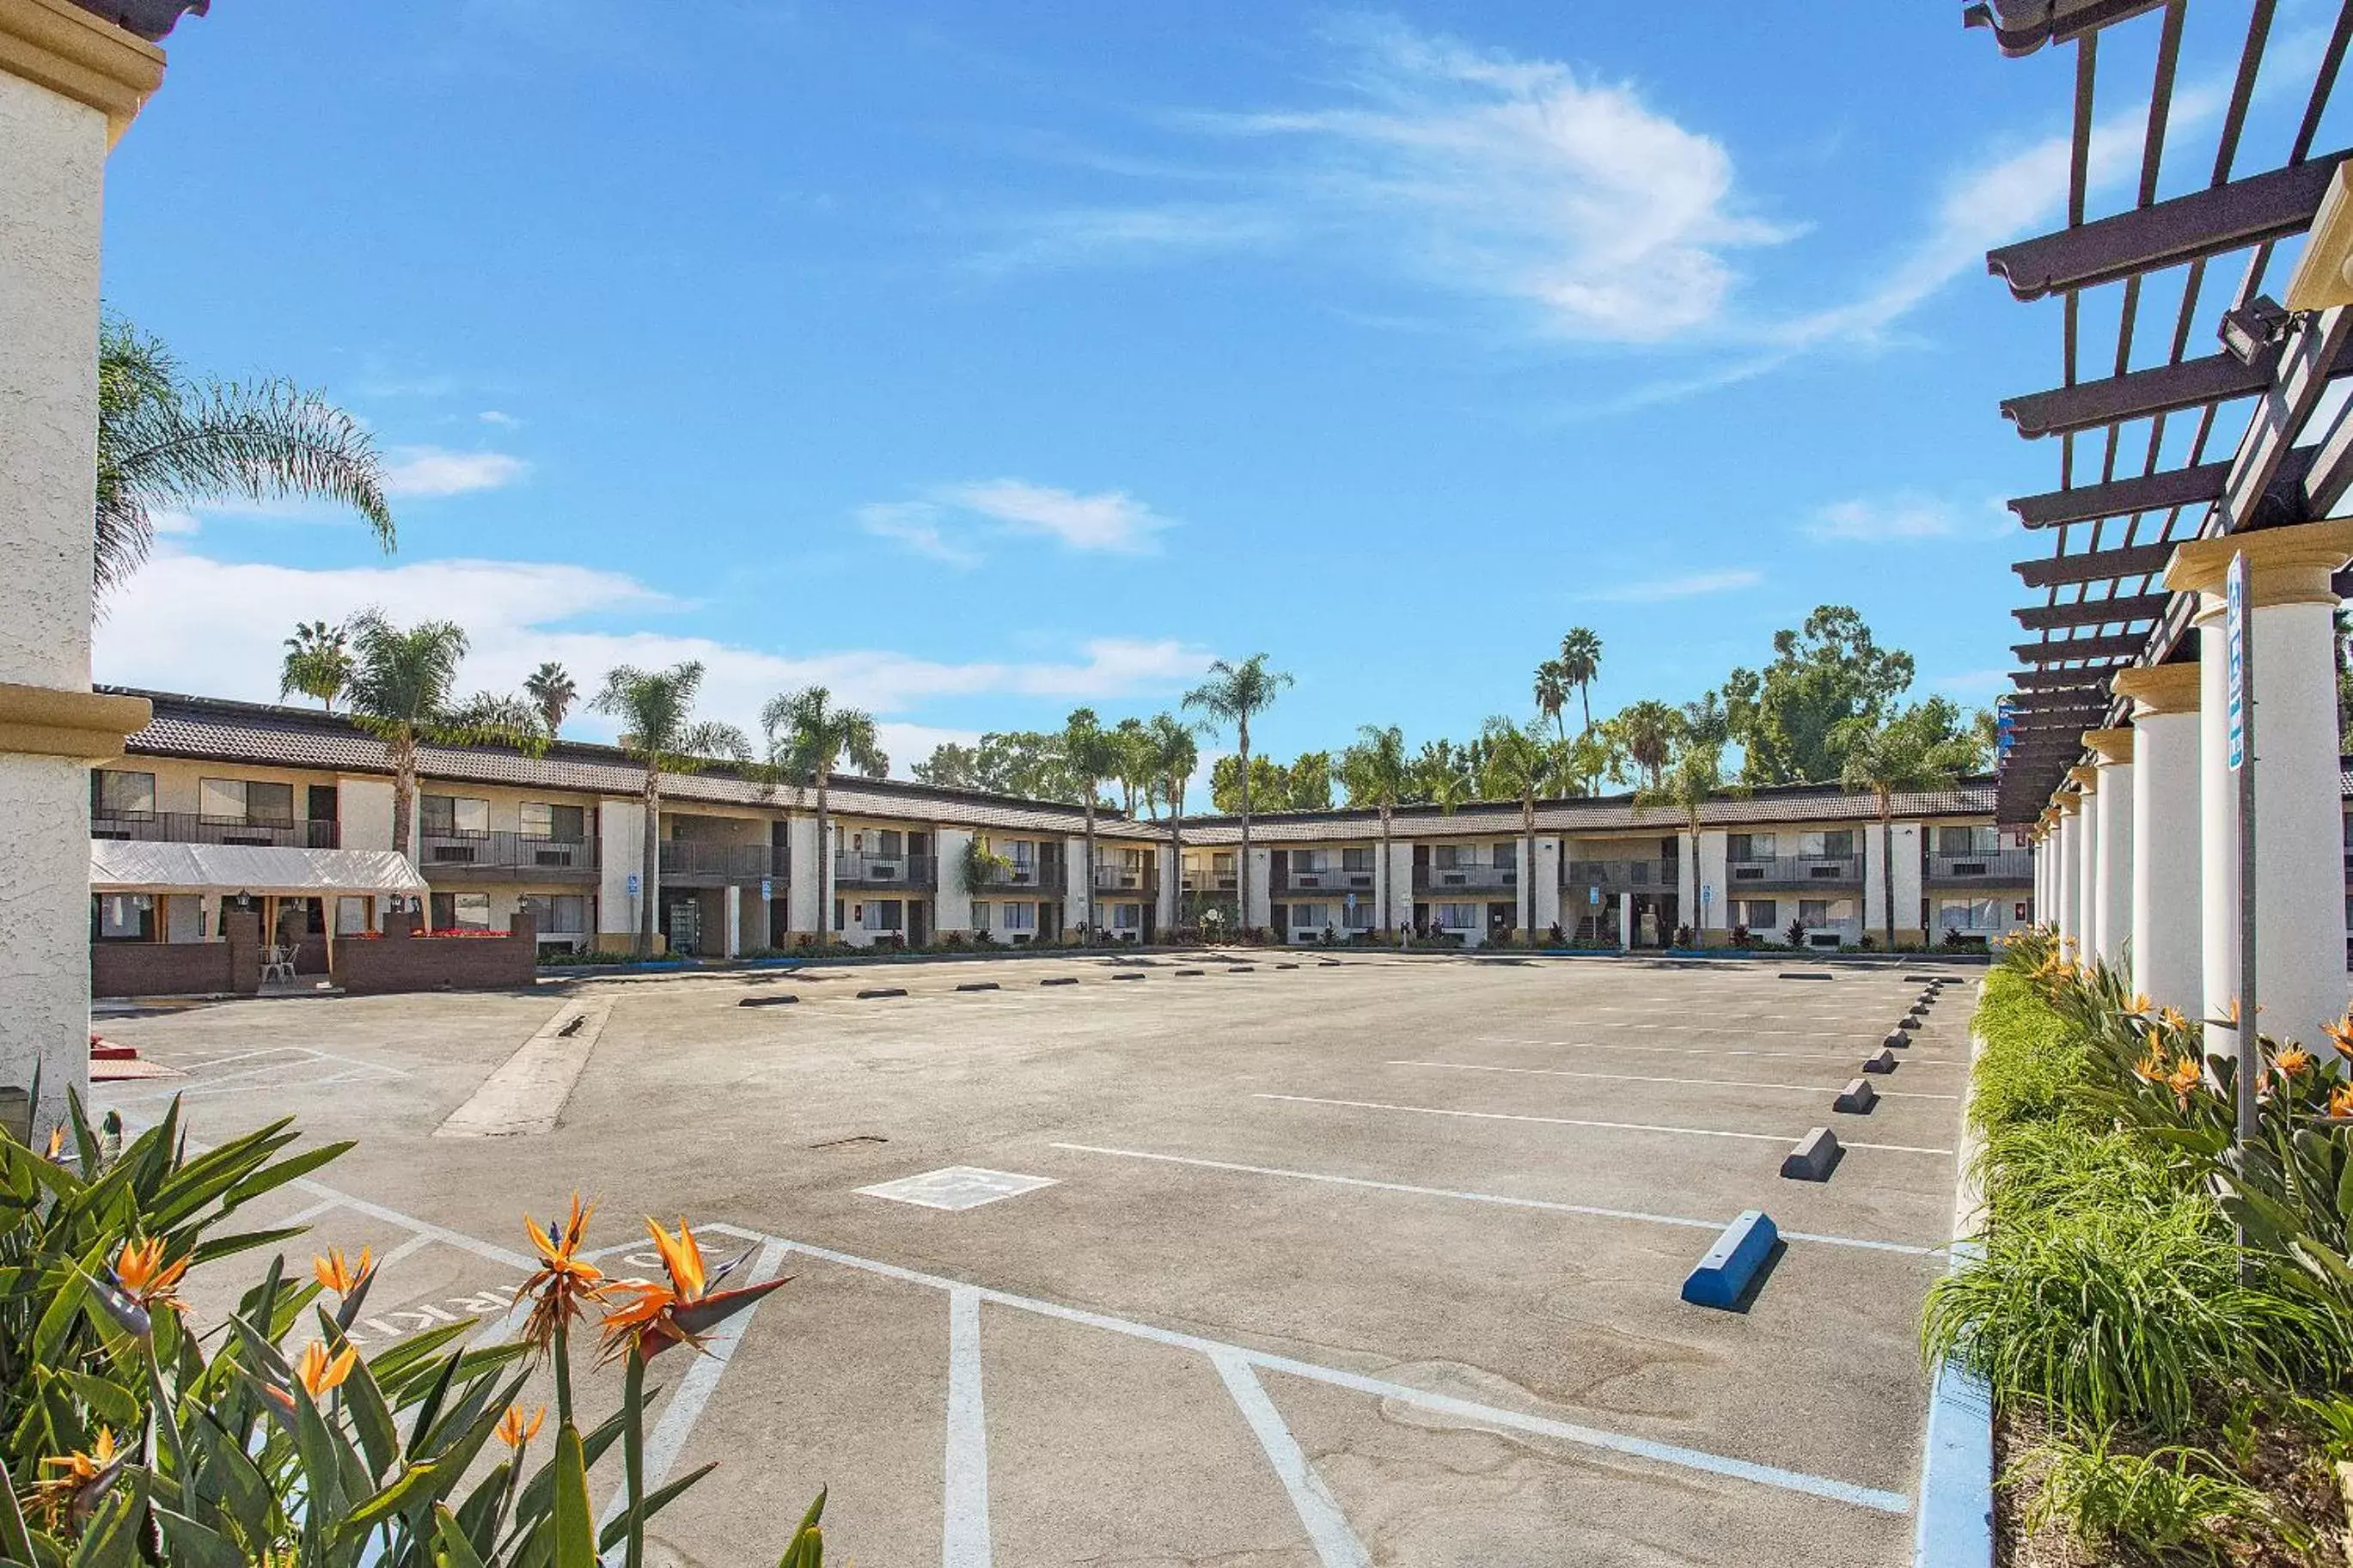 Property building, Other Activities in Stanford Inn & Suites Anaheim